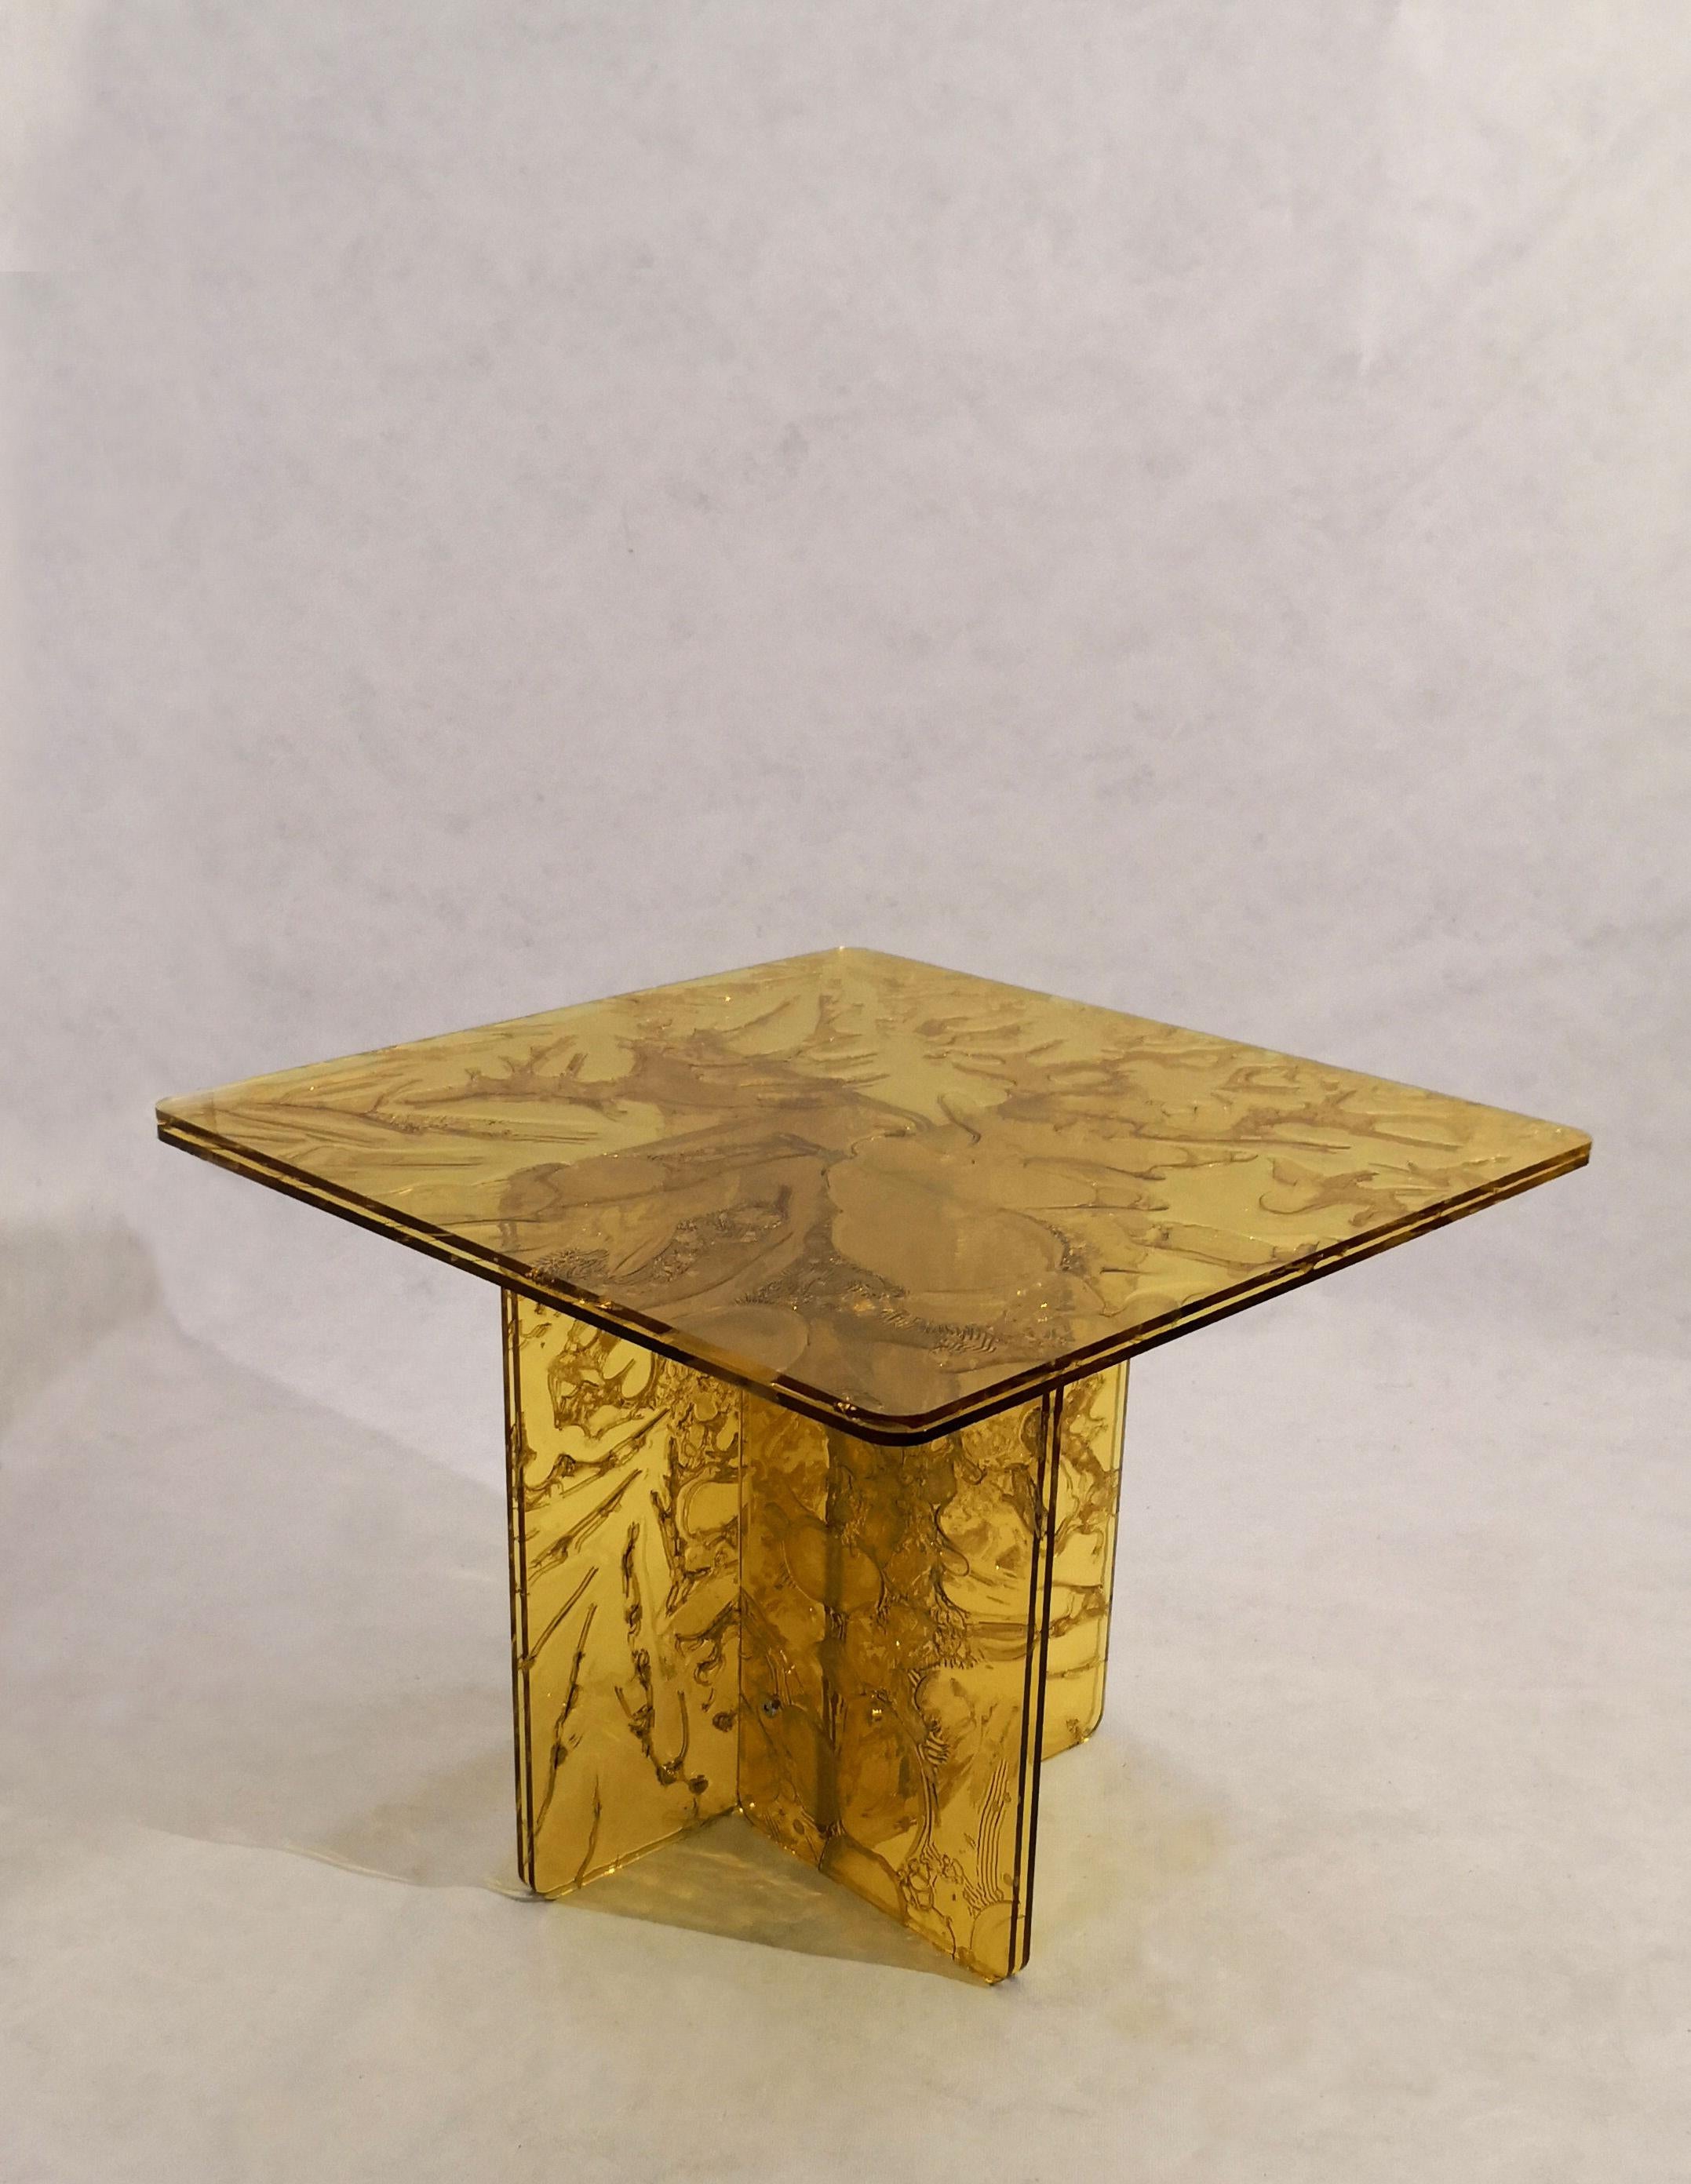 Modern Sketch Quadro Sidetable Made of Yellow Acrylic Des. Roberto Giacomucci in 2022 For Sale